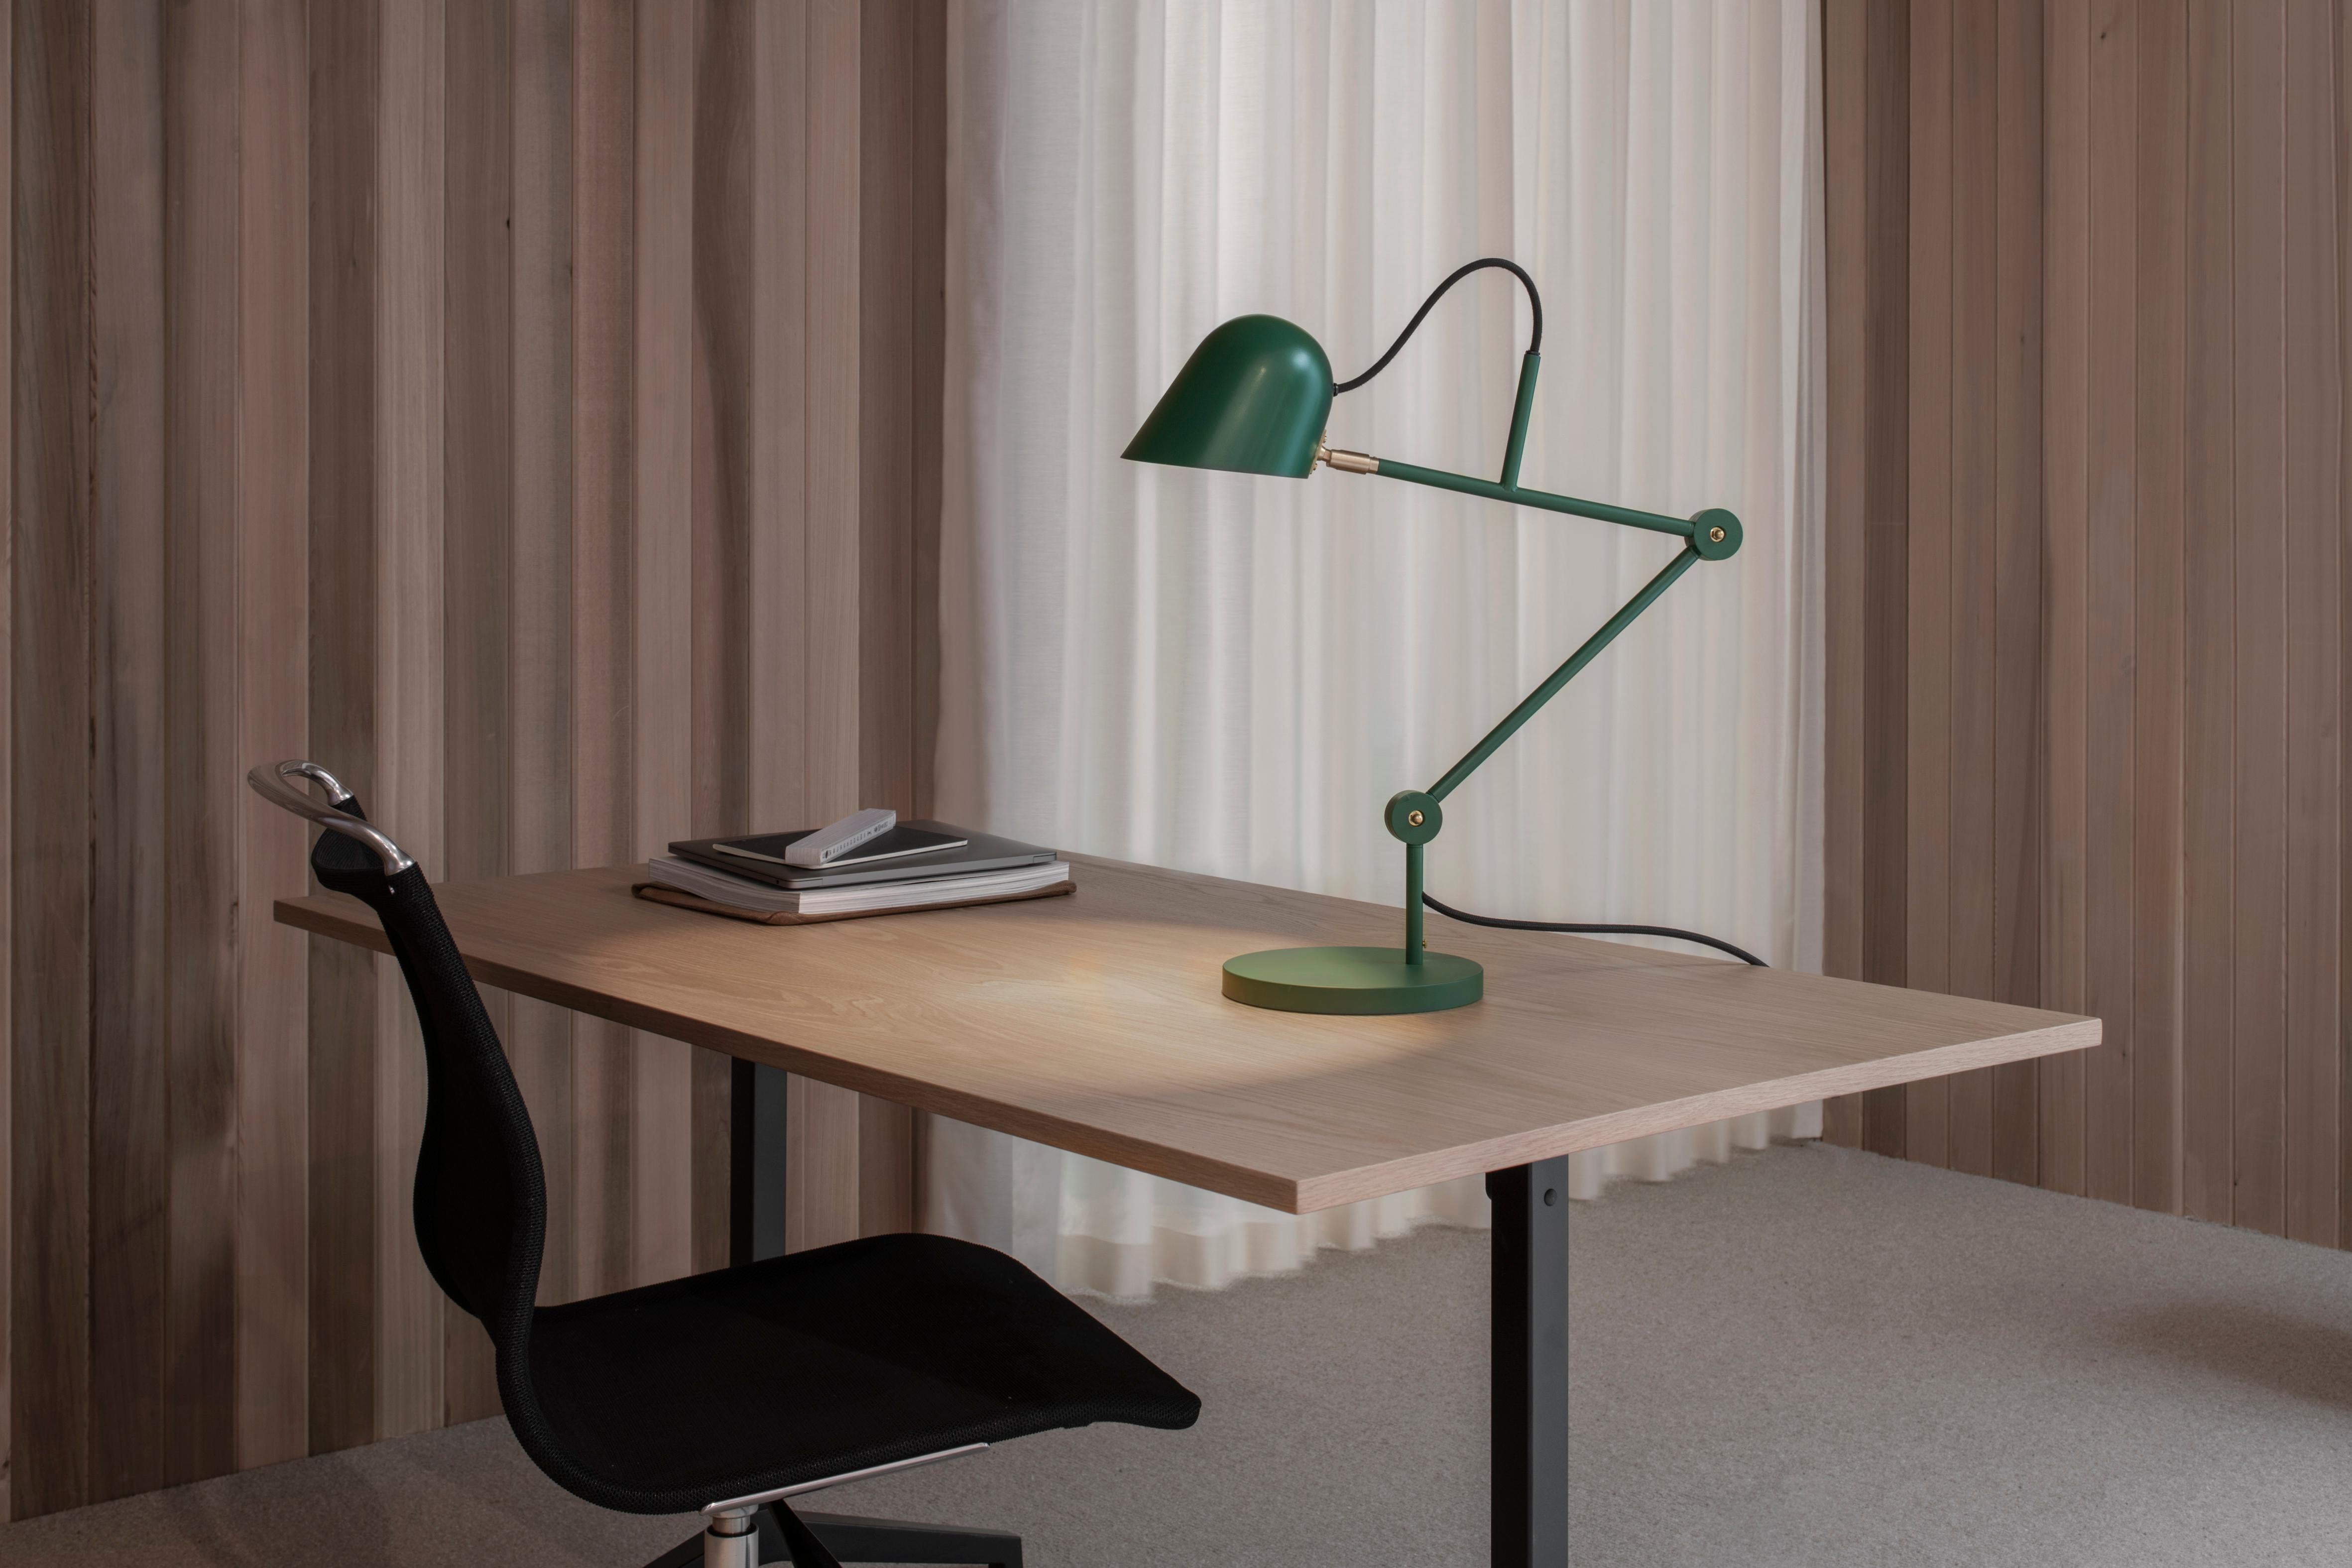 'Streck' adjustable table lamp by Joel Karlsson for Örsjö in pine green.

Executed in powder-coated steel with brass details, the 'Streck' series is both timeless and refined in its minimalism. Clean geometric lines and understated simplicity make